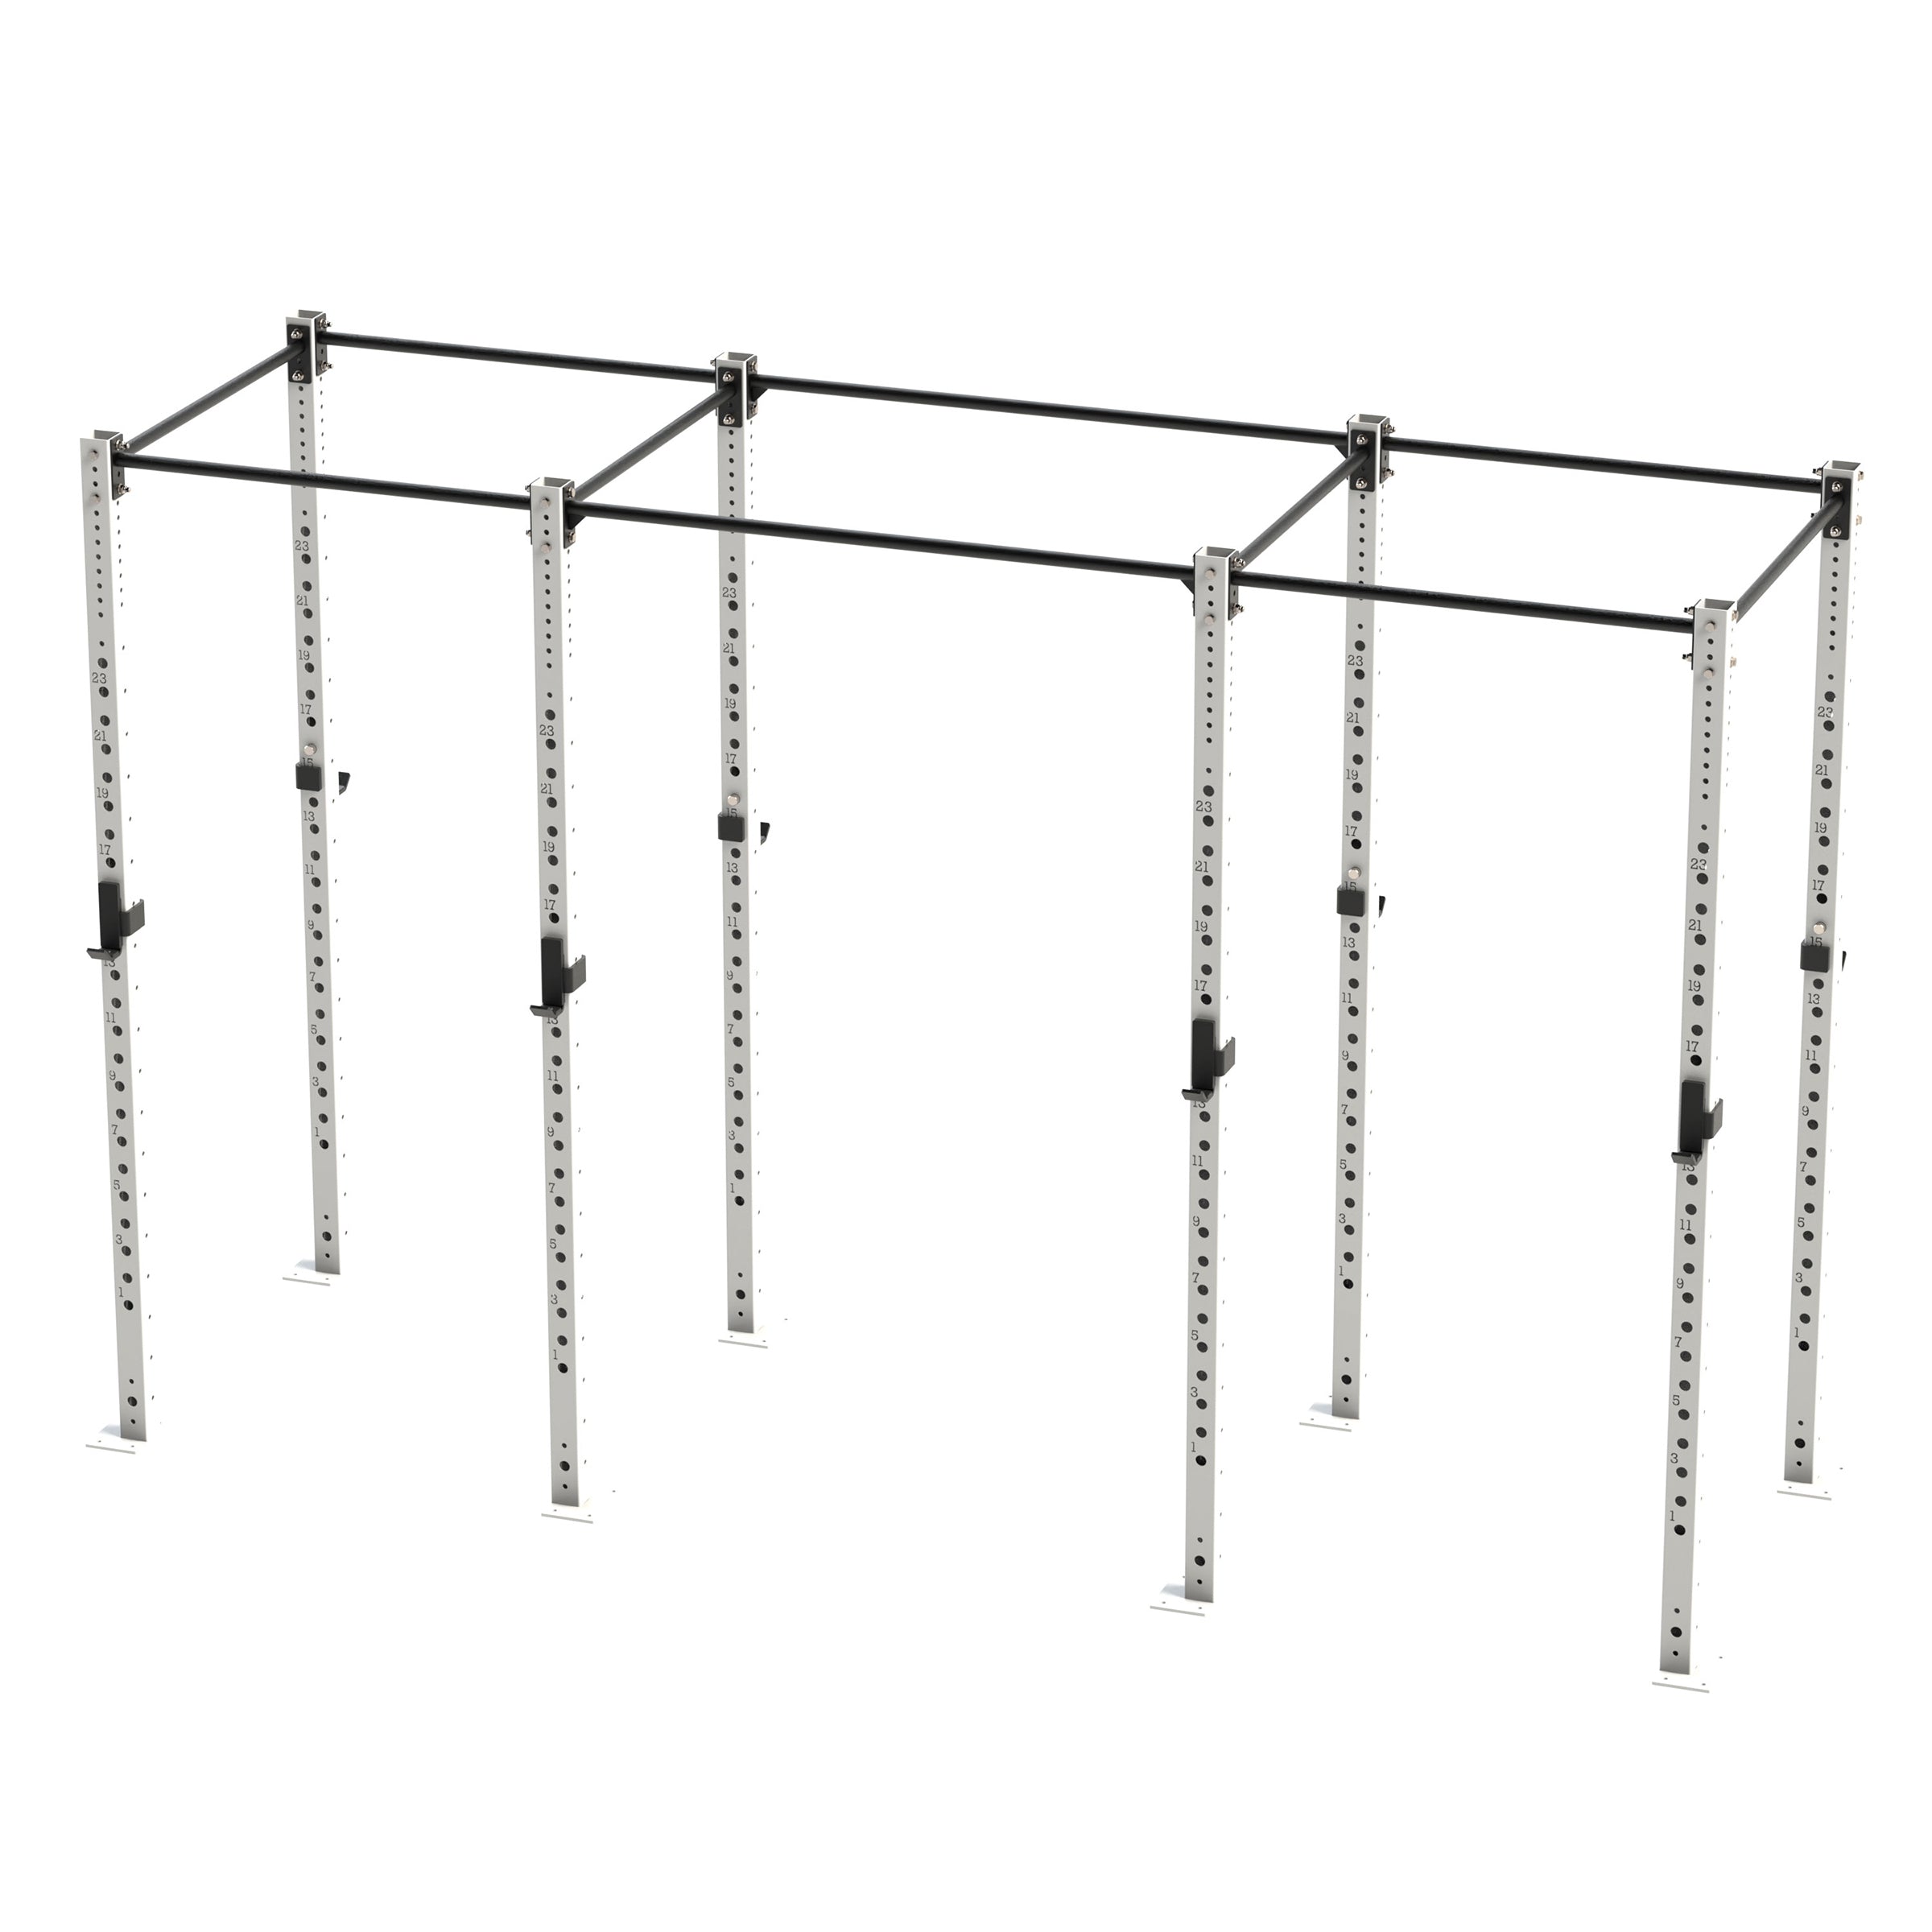 Bison Series - 4 Bay Freestanding Rig - Wolverson Fitness